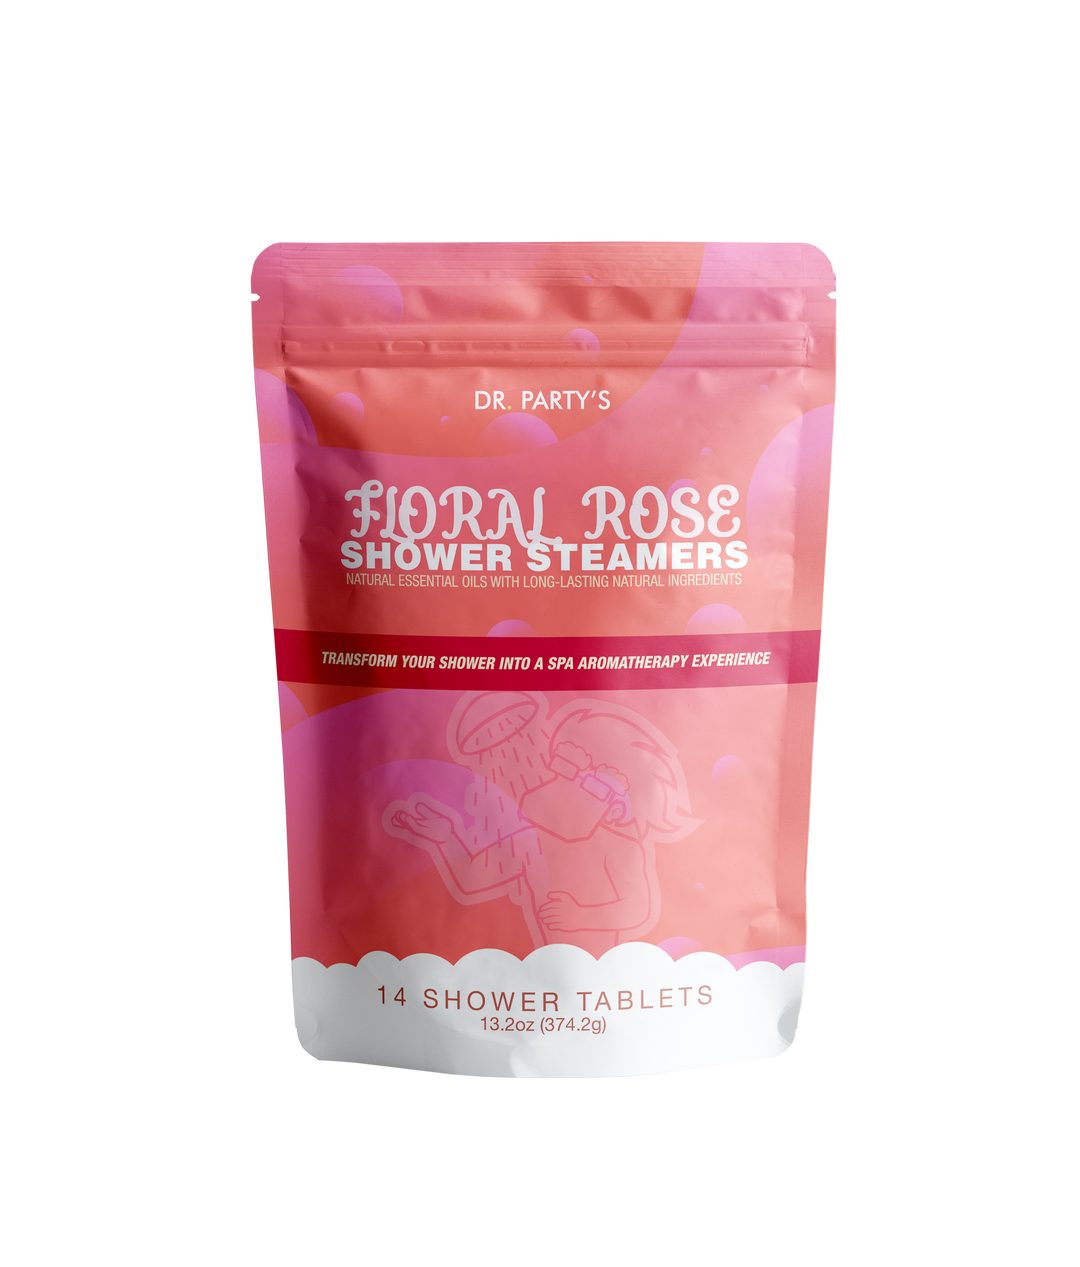 Let the romantic and soothing aroma of roses enhance your daily routine, with our 14-pack of shower steamers that promise a luxurious spa experience in every steam.